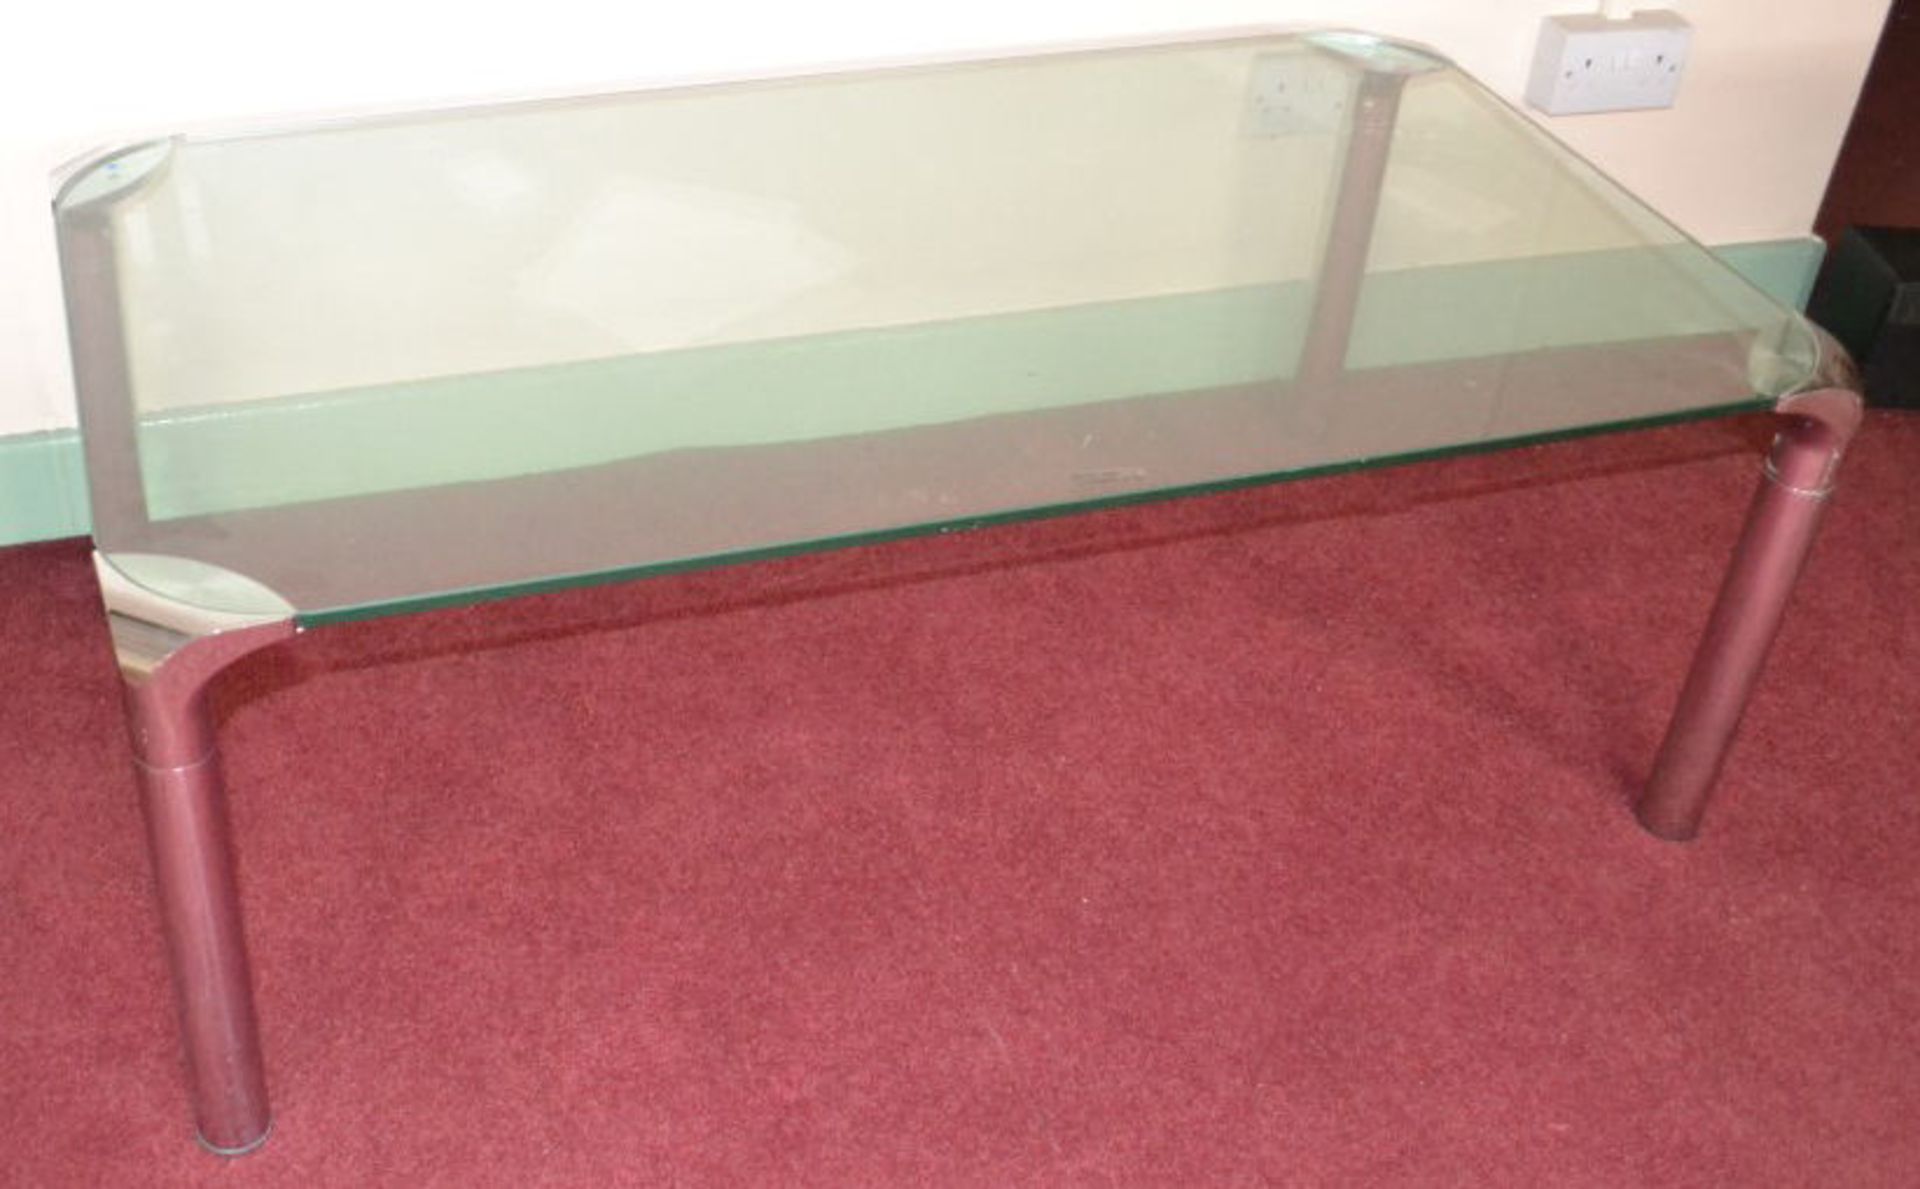 1 x Modern Rectangular Glass Coffee Table with Silver Legs - Image 4 of 4